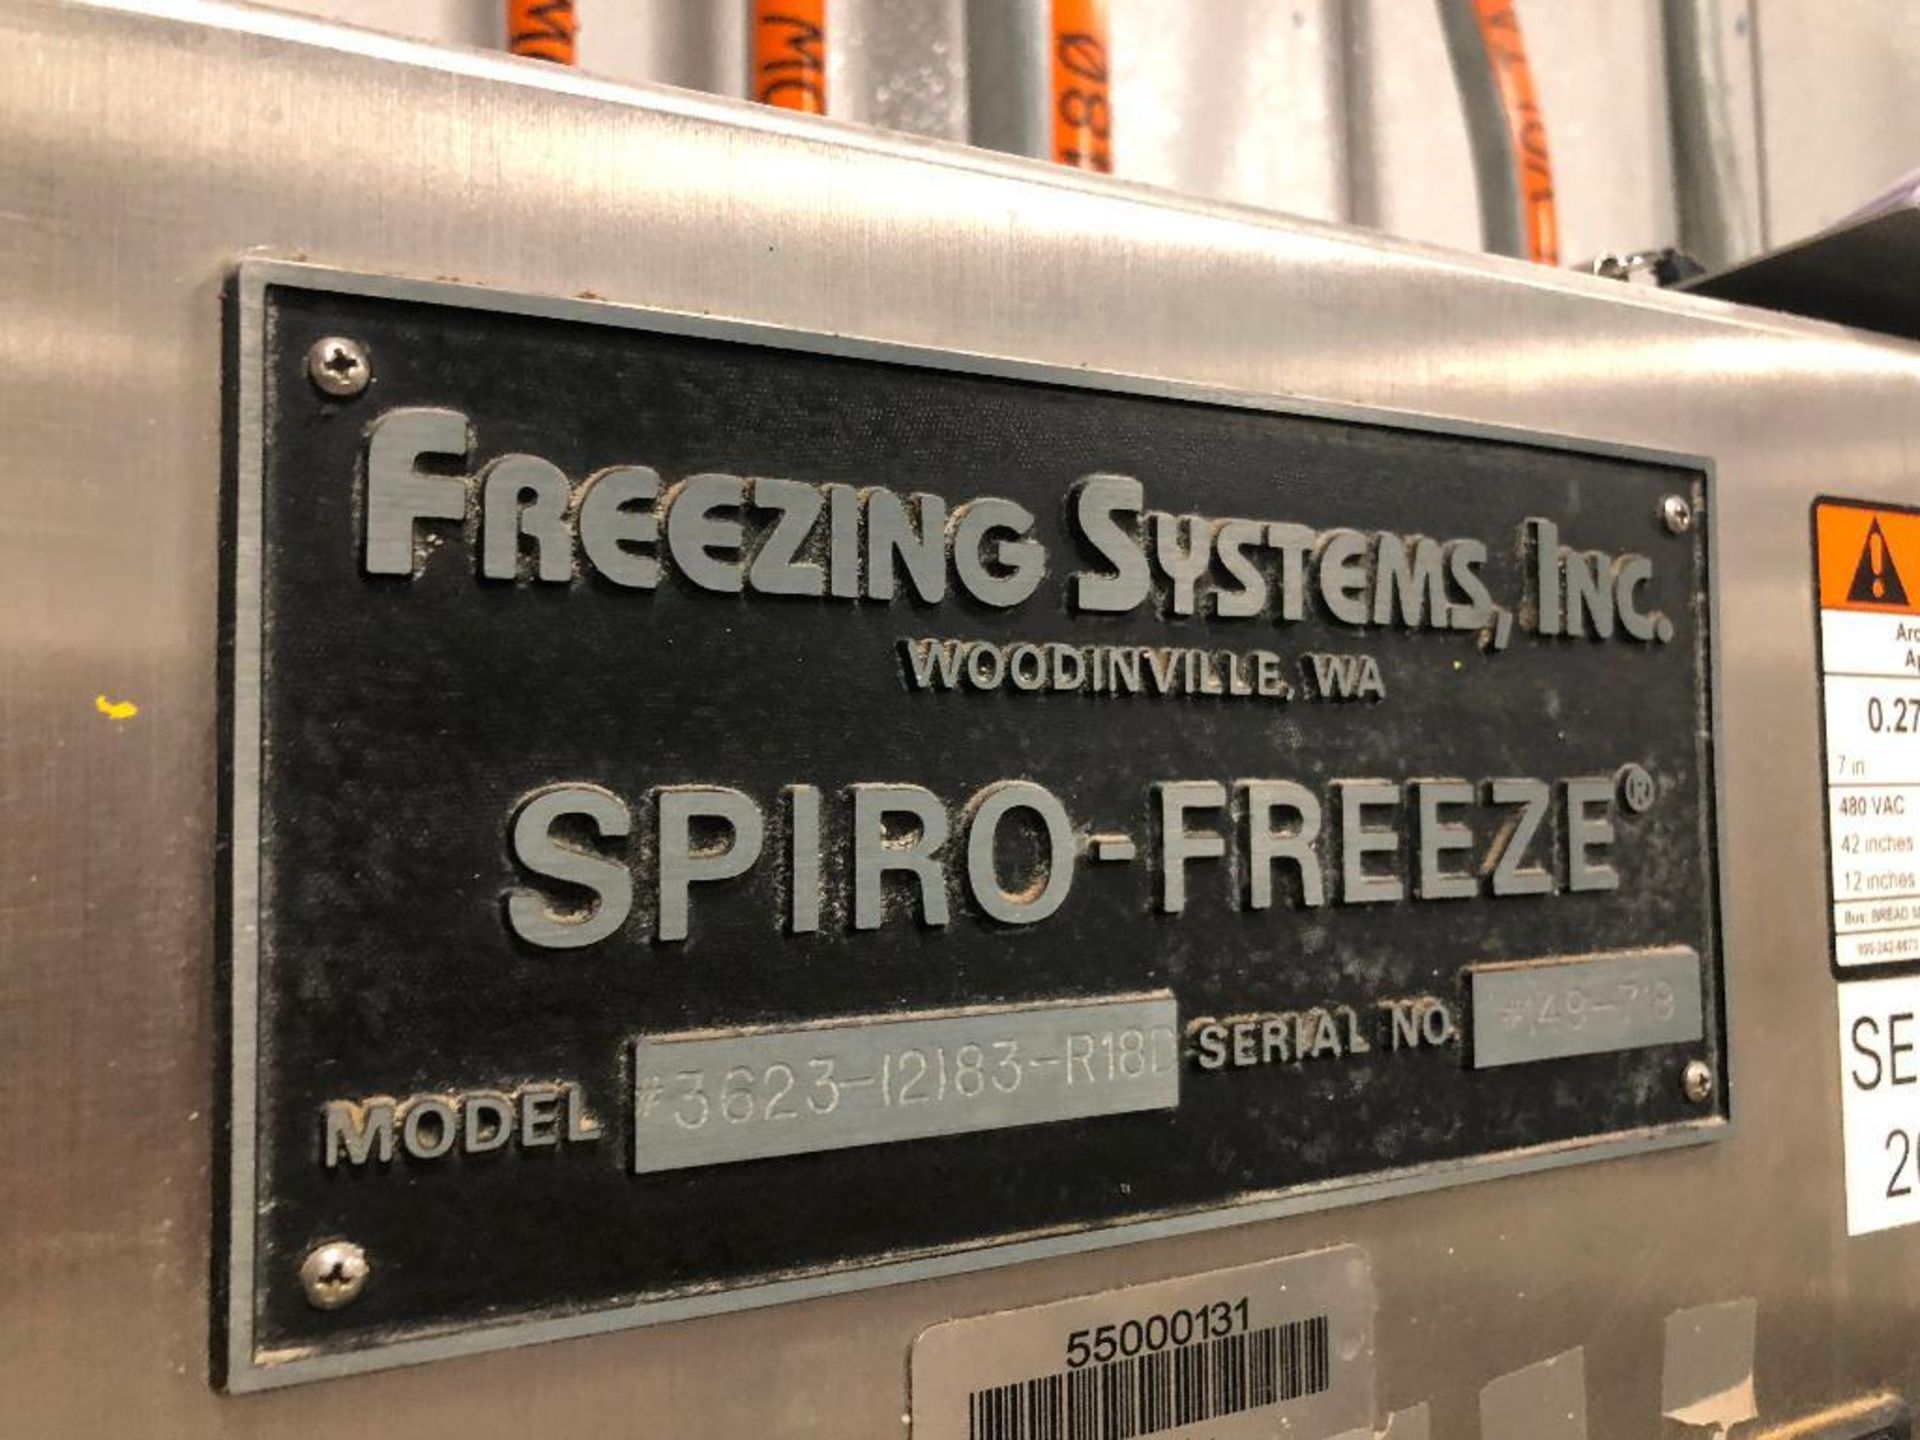 SpiroFreeze sprial freezer, model 3623-12183-R18D, s/n 149-718, 36 in. wide belt, 6 in. clearance, 1 - Image 13 of 27